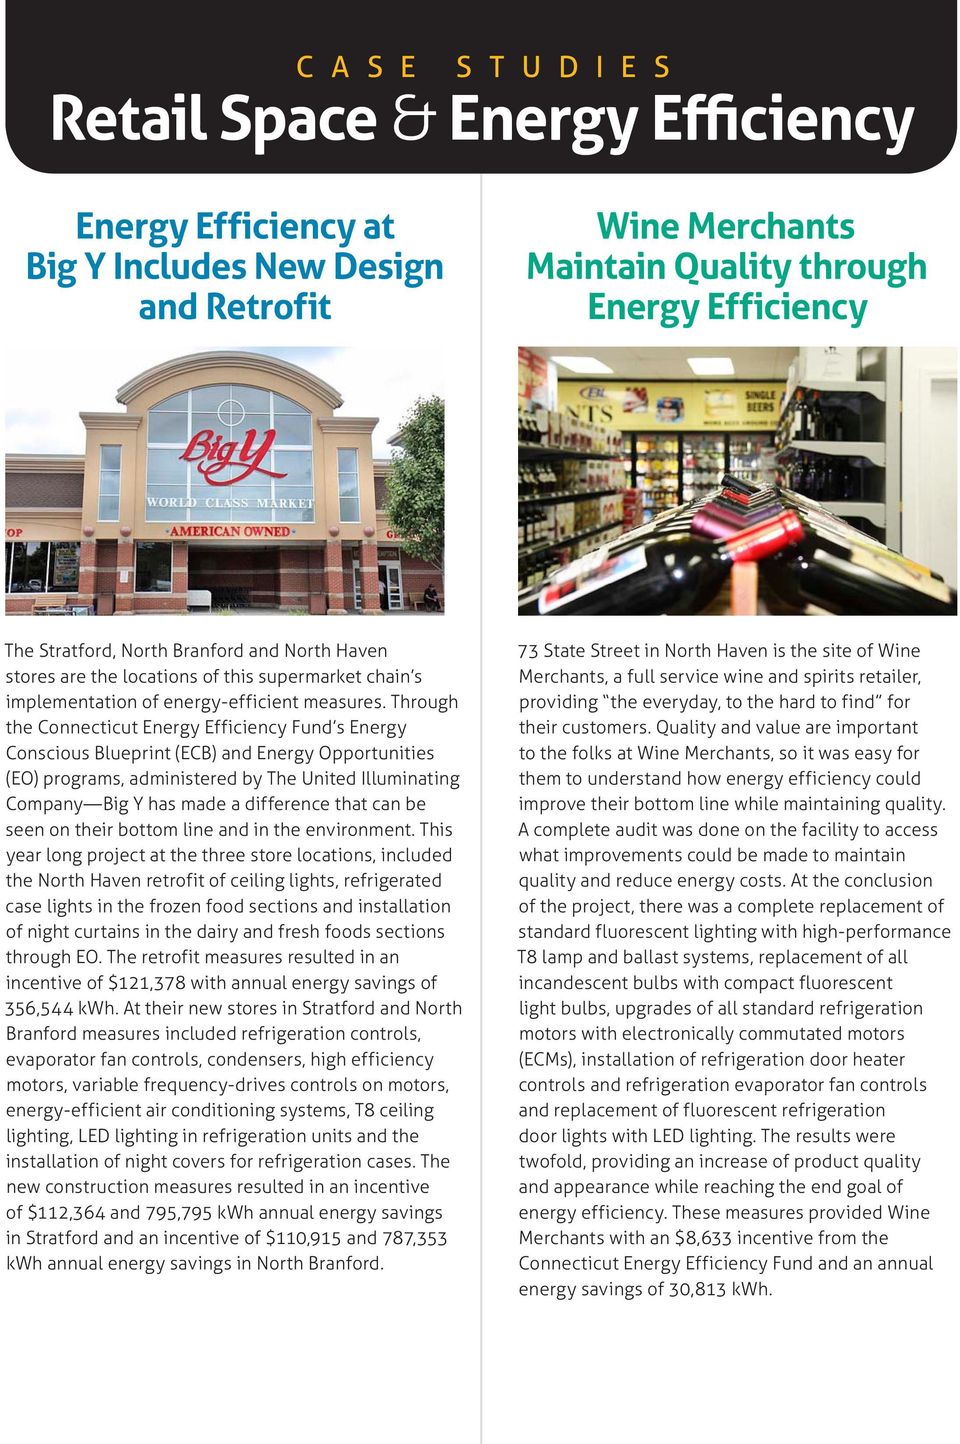 Through the Connecticut Efficiency Fund s Conscious Blueprint (ECB) and Opportunities (EO) programs, administered by The United Illuminating Company Big Y has made a difference that can be seen on